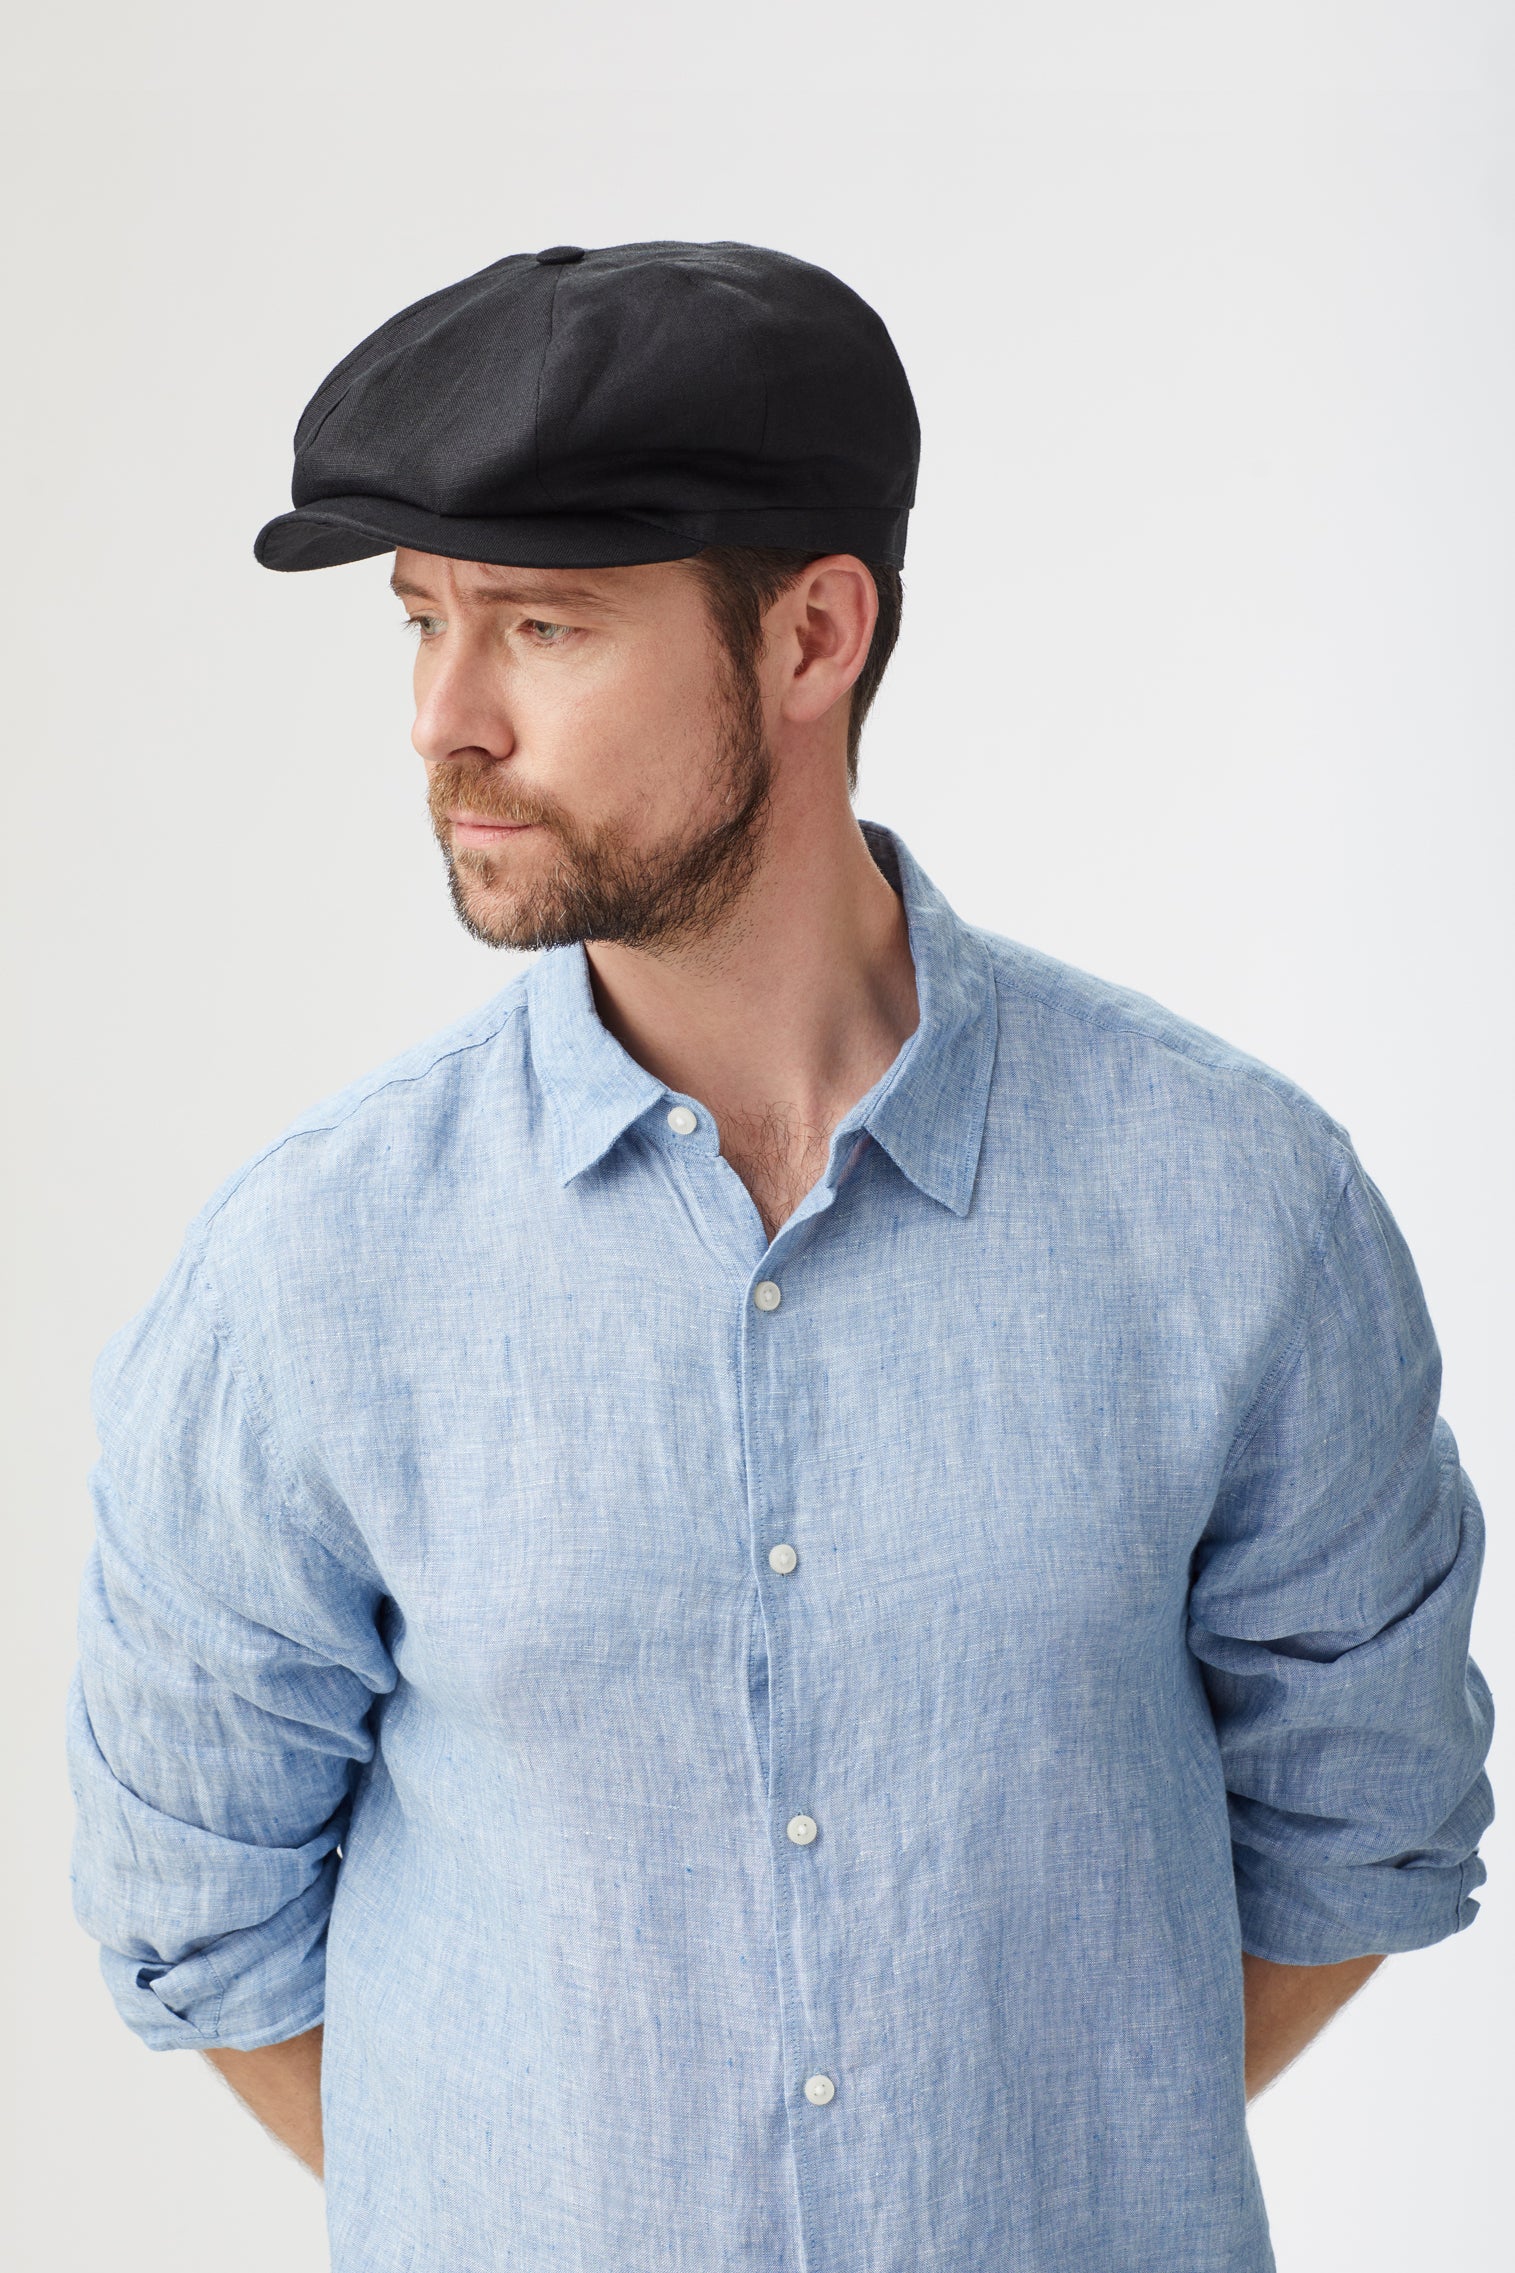 Tremelo Black Linen Bakerboy Cap - Father's Day Gift Guide - Lock & Co. Hatters London UK